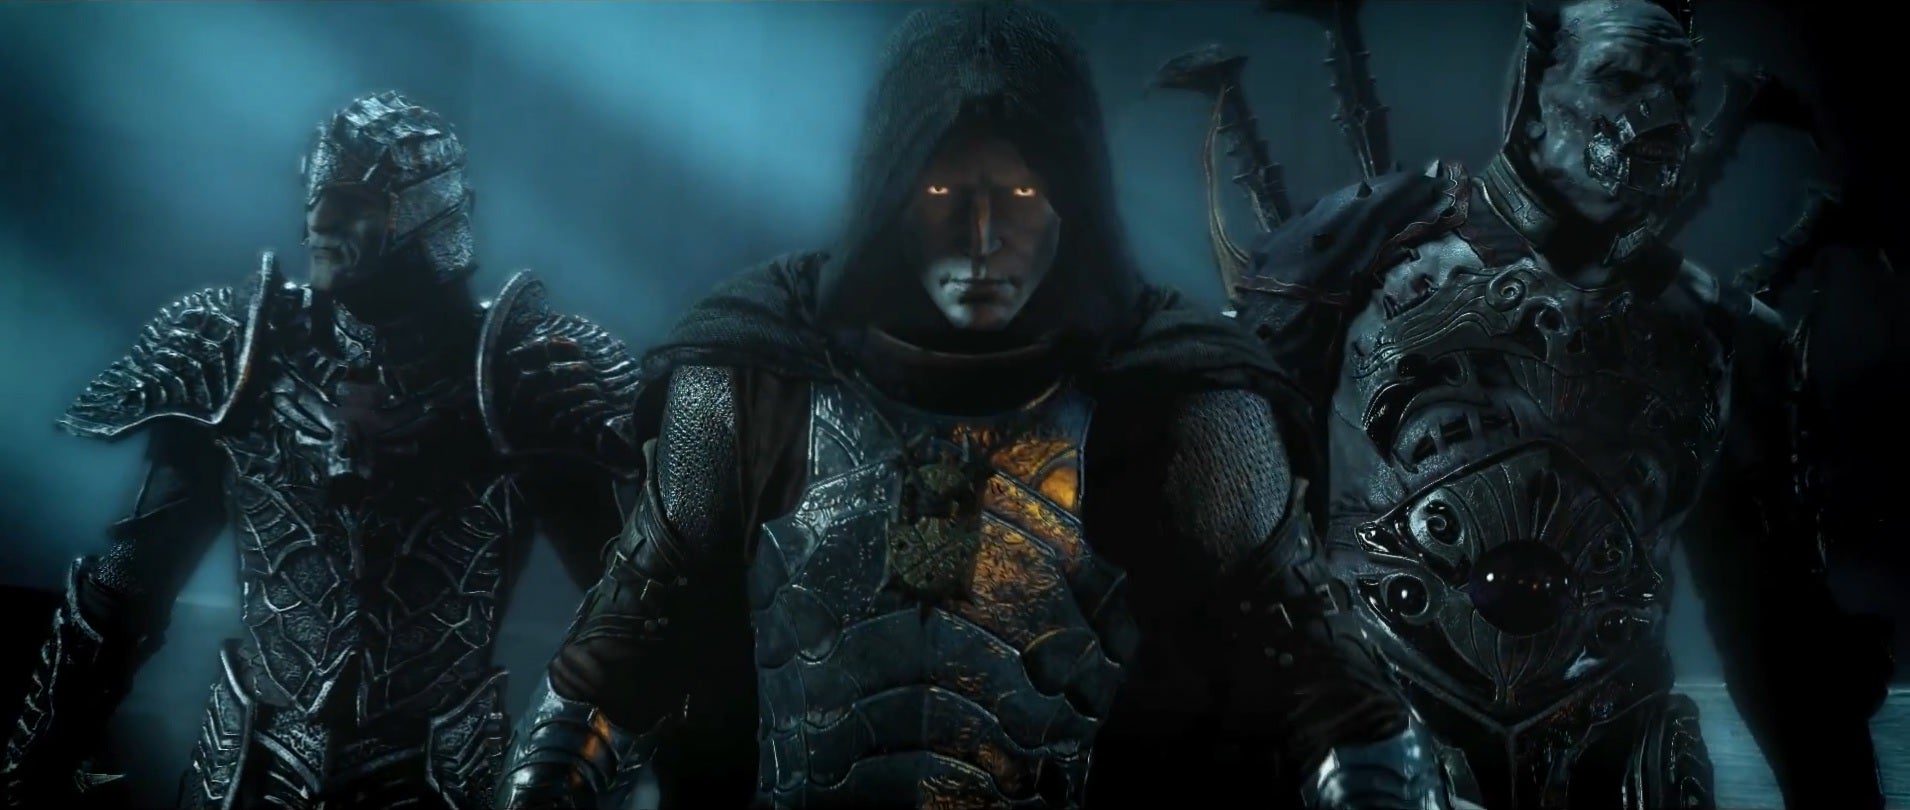 Image for Shadow of Mordor now available on last-gen consoles in North America